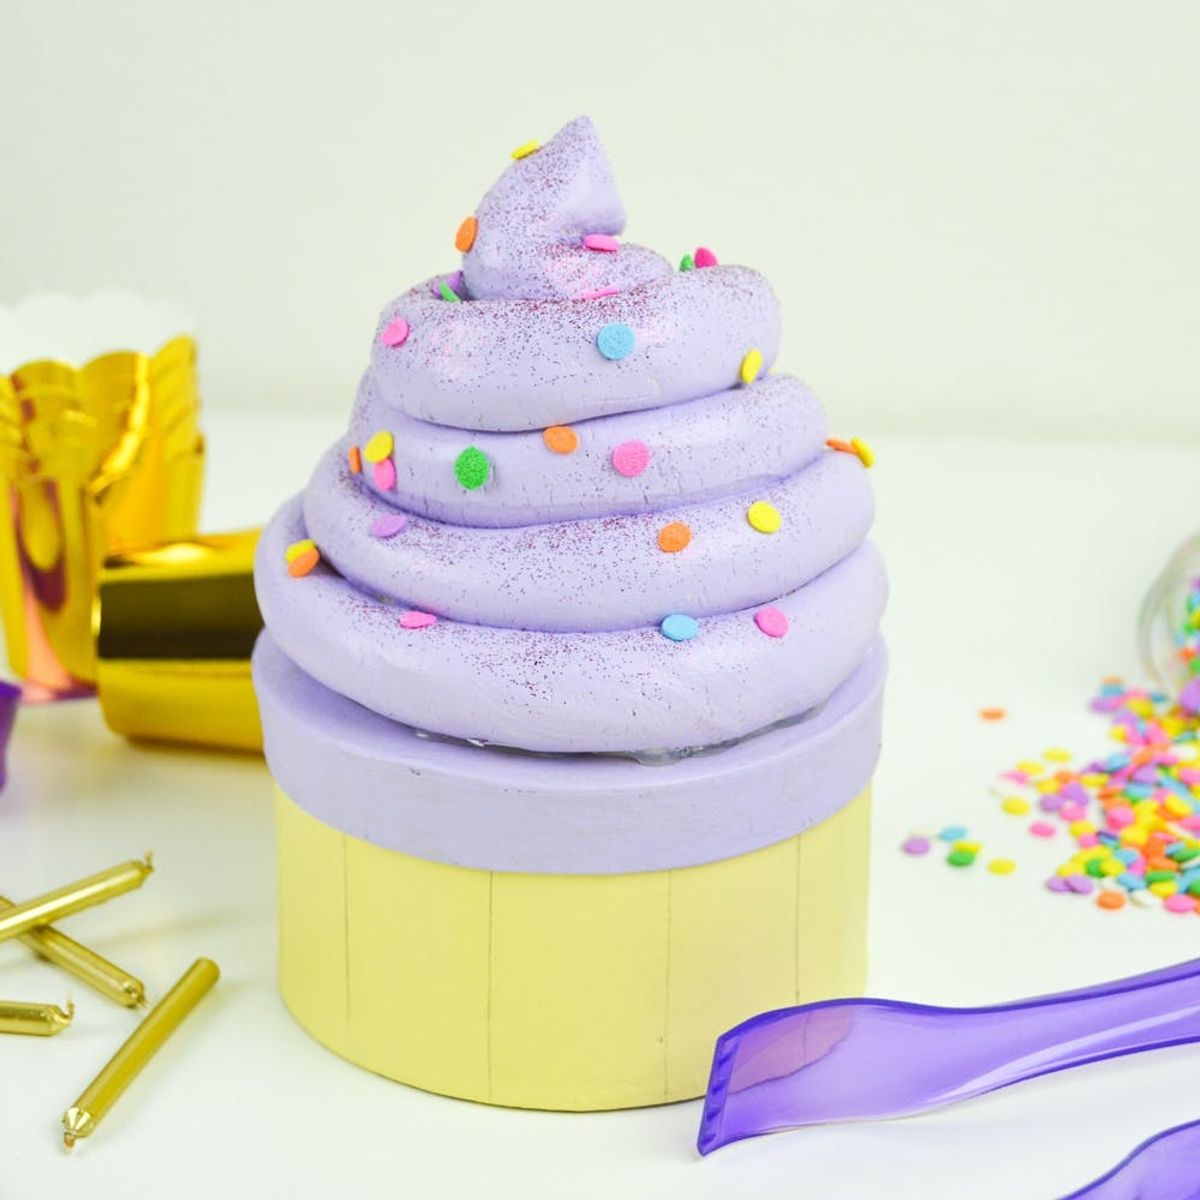 6 Creative Ways to Package Your Cupcakes